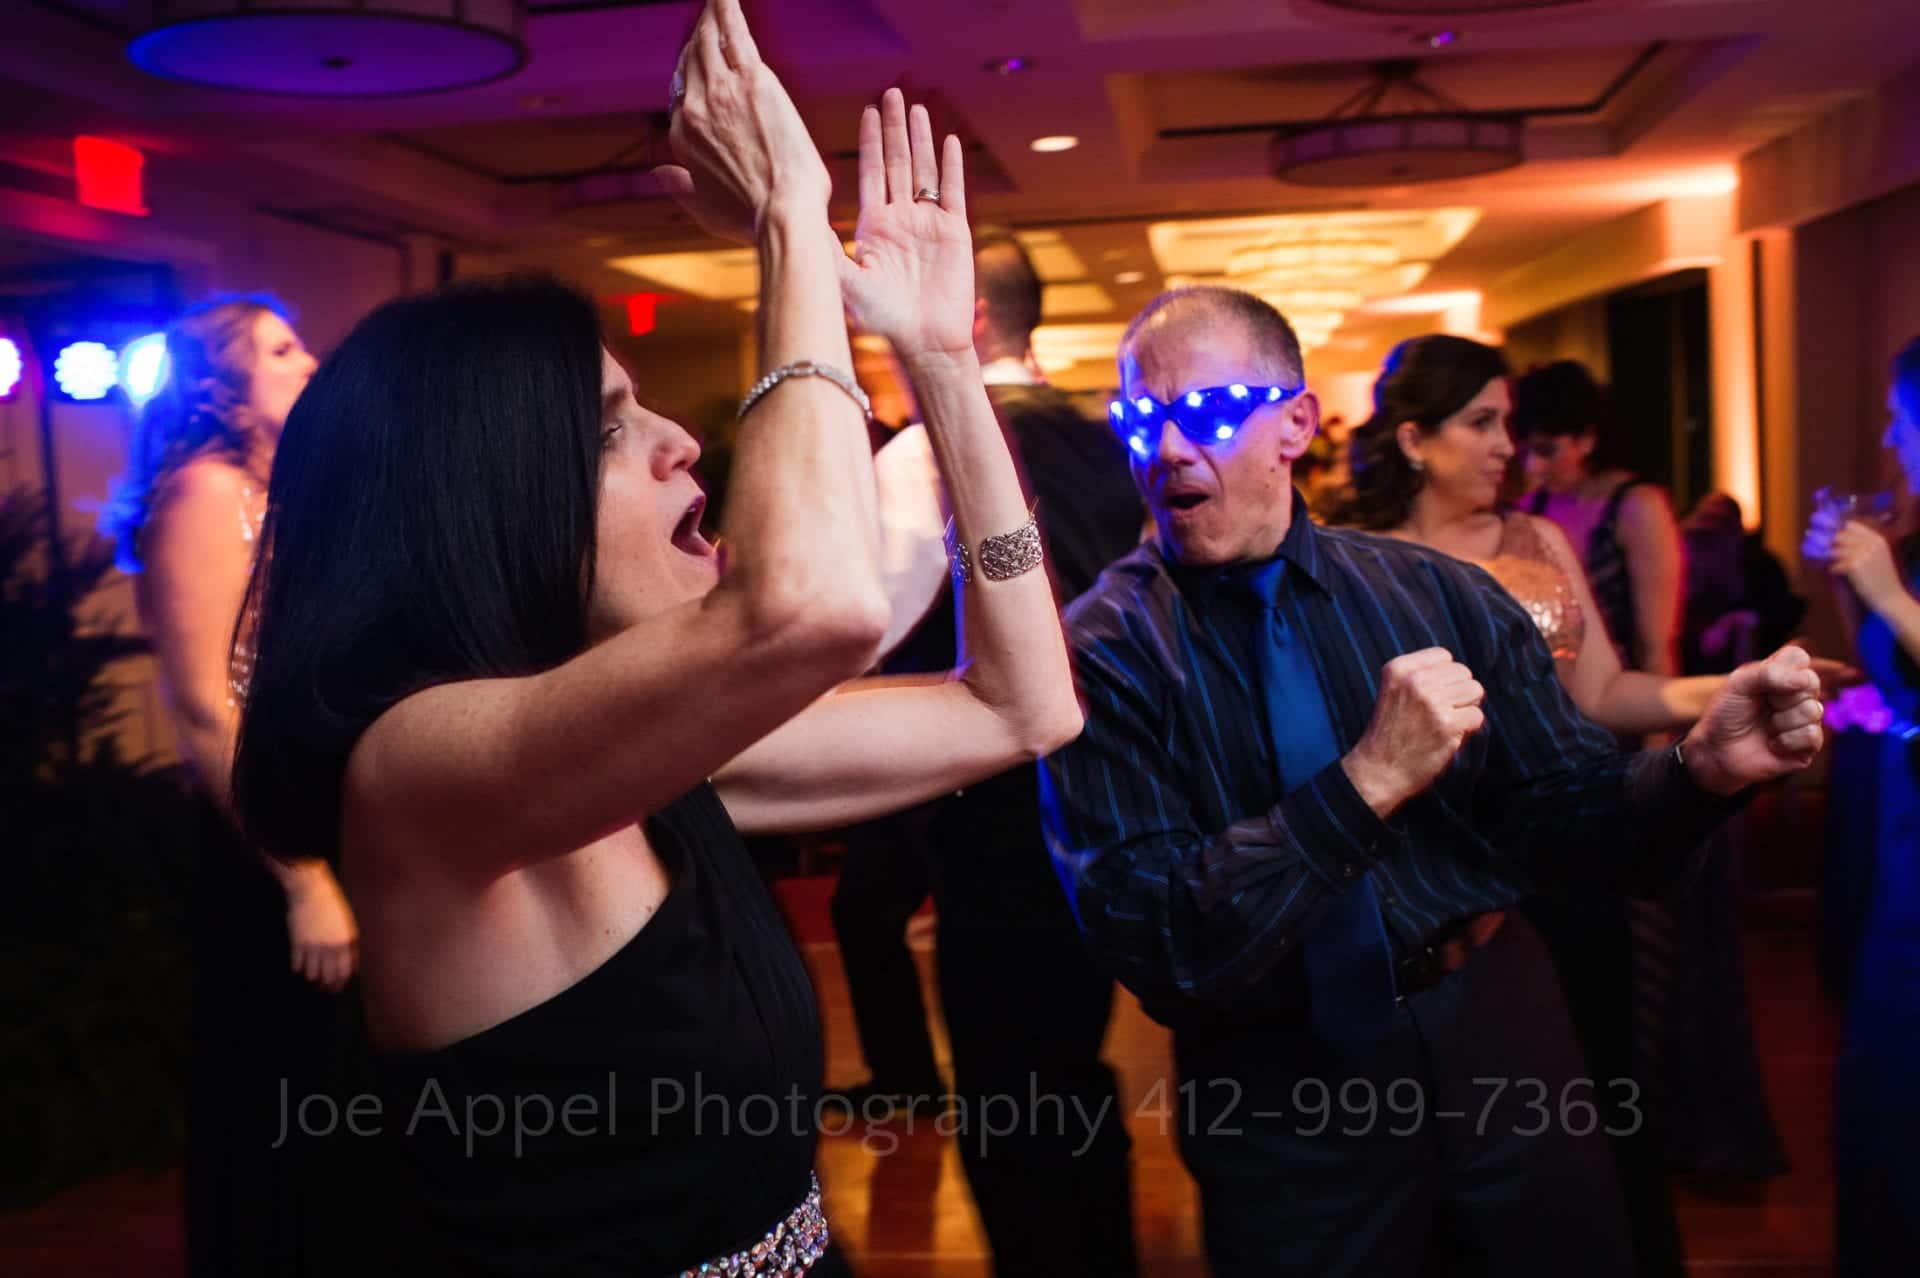 A woman yells and claps her hands in the air as she dances with a man who wears blue sunglasses that have LED lights on them.